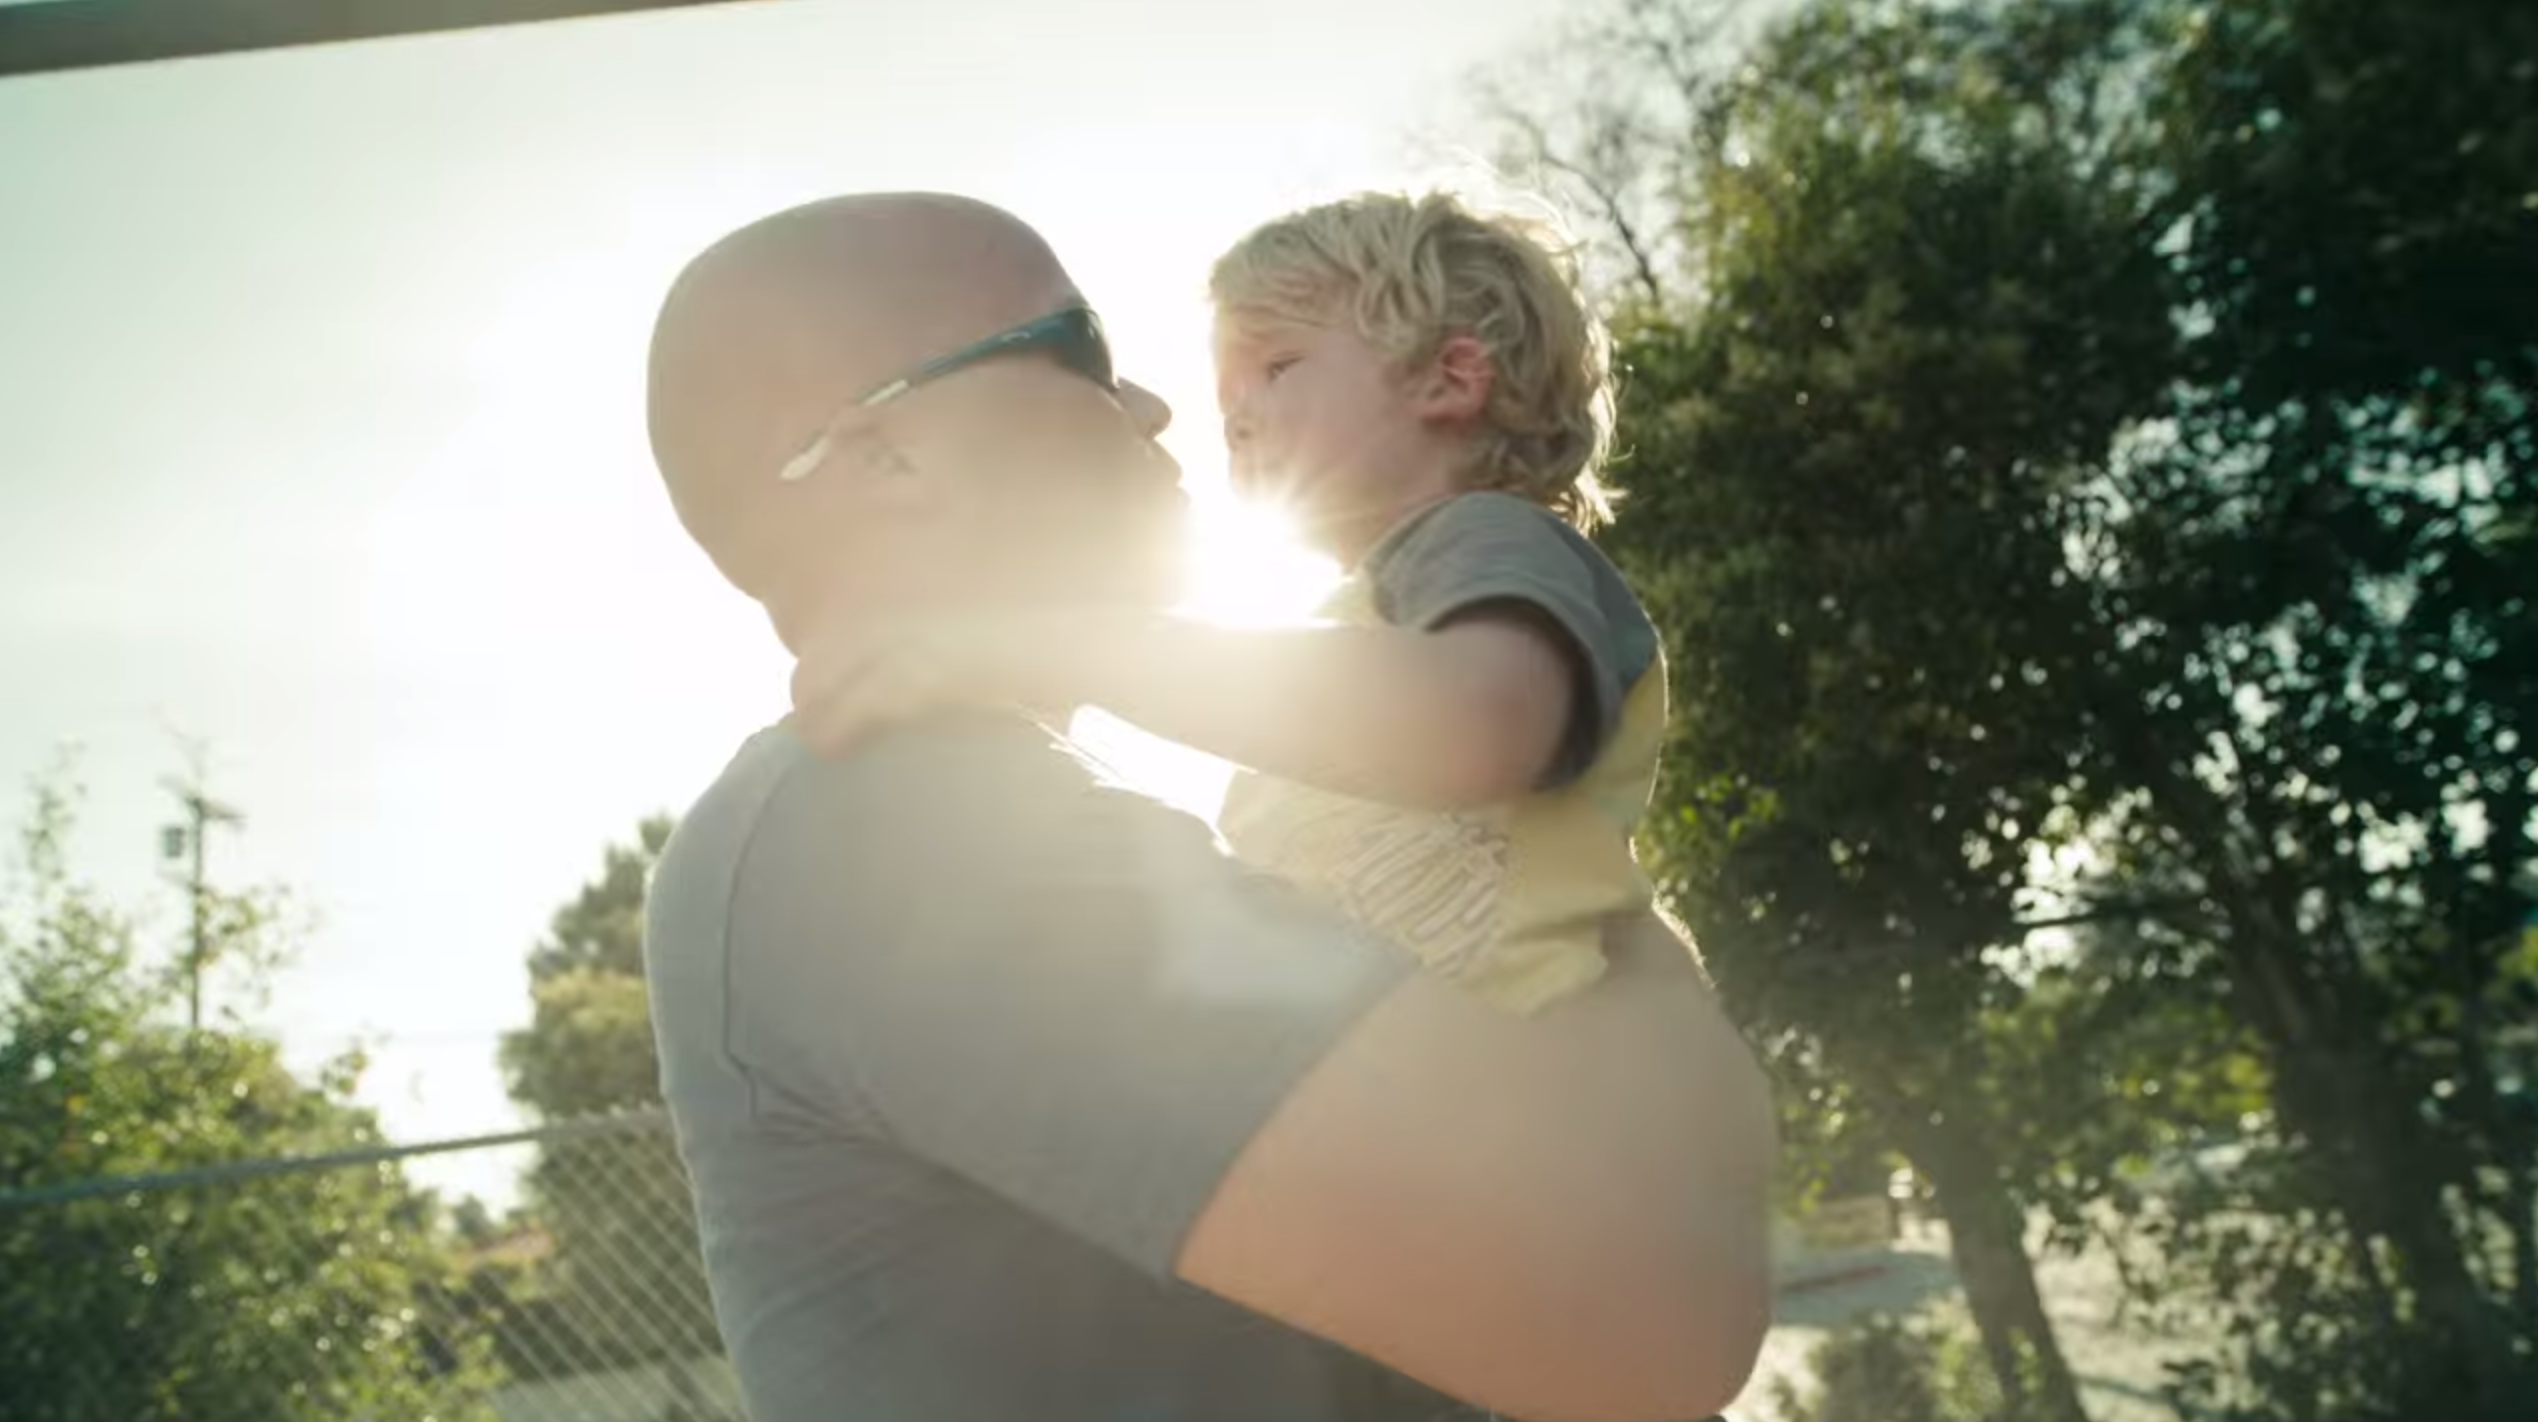 The new Dove Men+Care Calls for Dad Video: Way to go, Dove! And way to go dads.